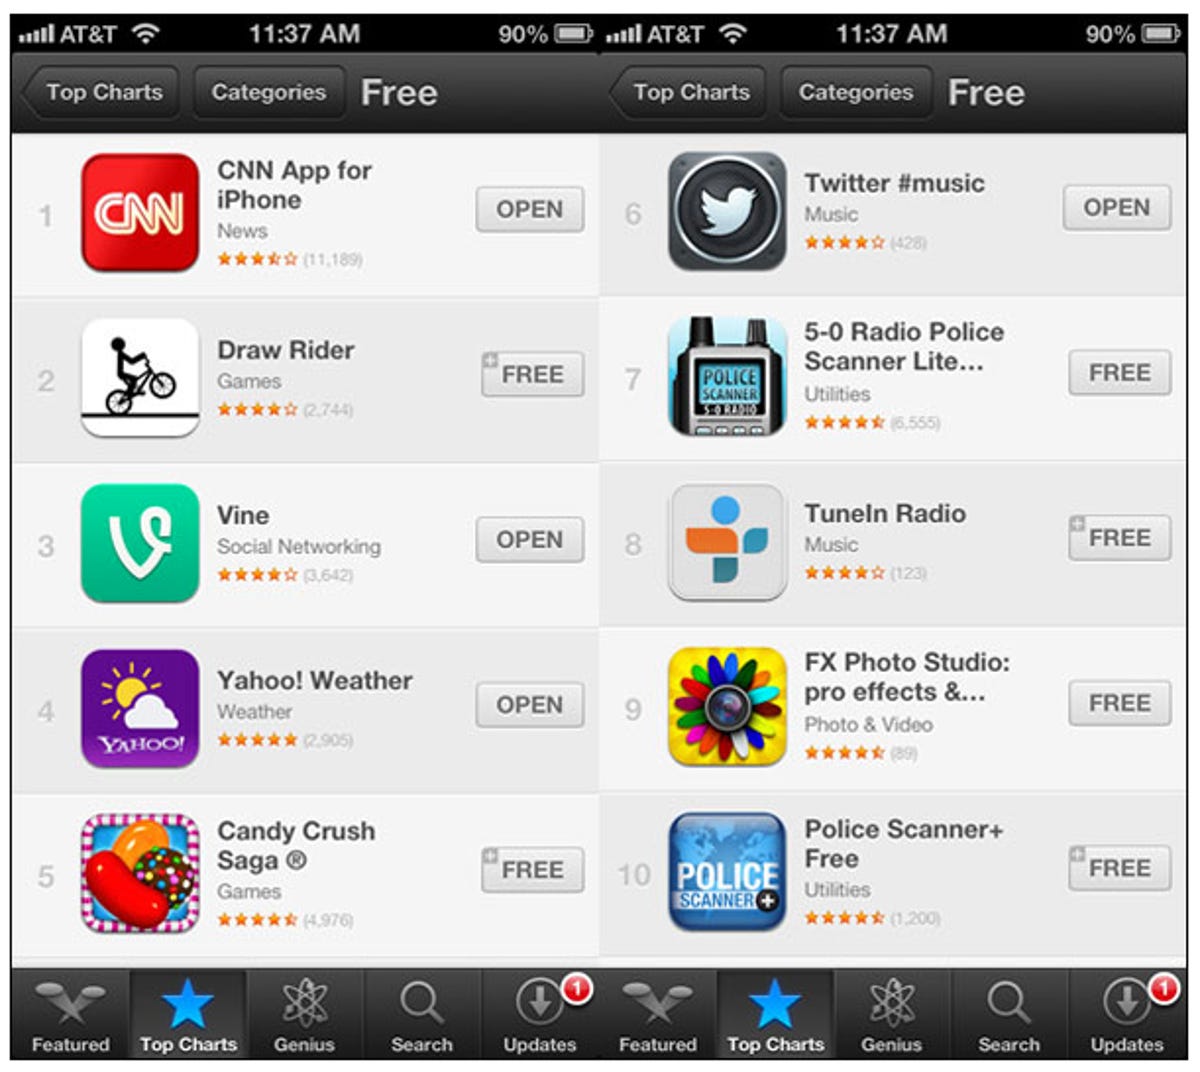 Scanner apps rise to the Top 10 on iTunes. Put the scanner apps down, I beg you.